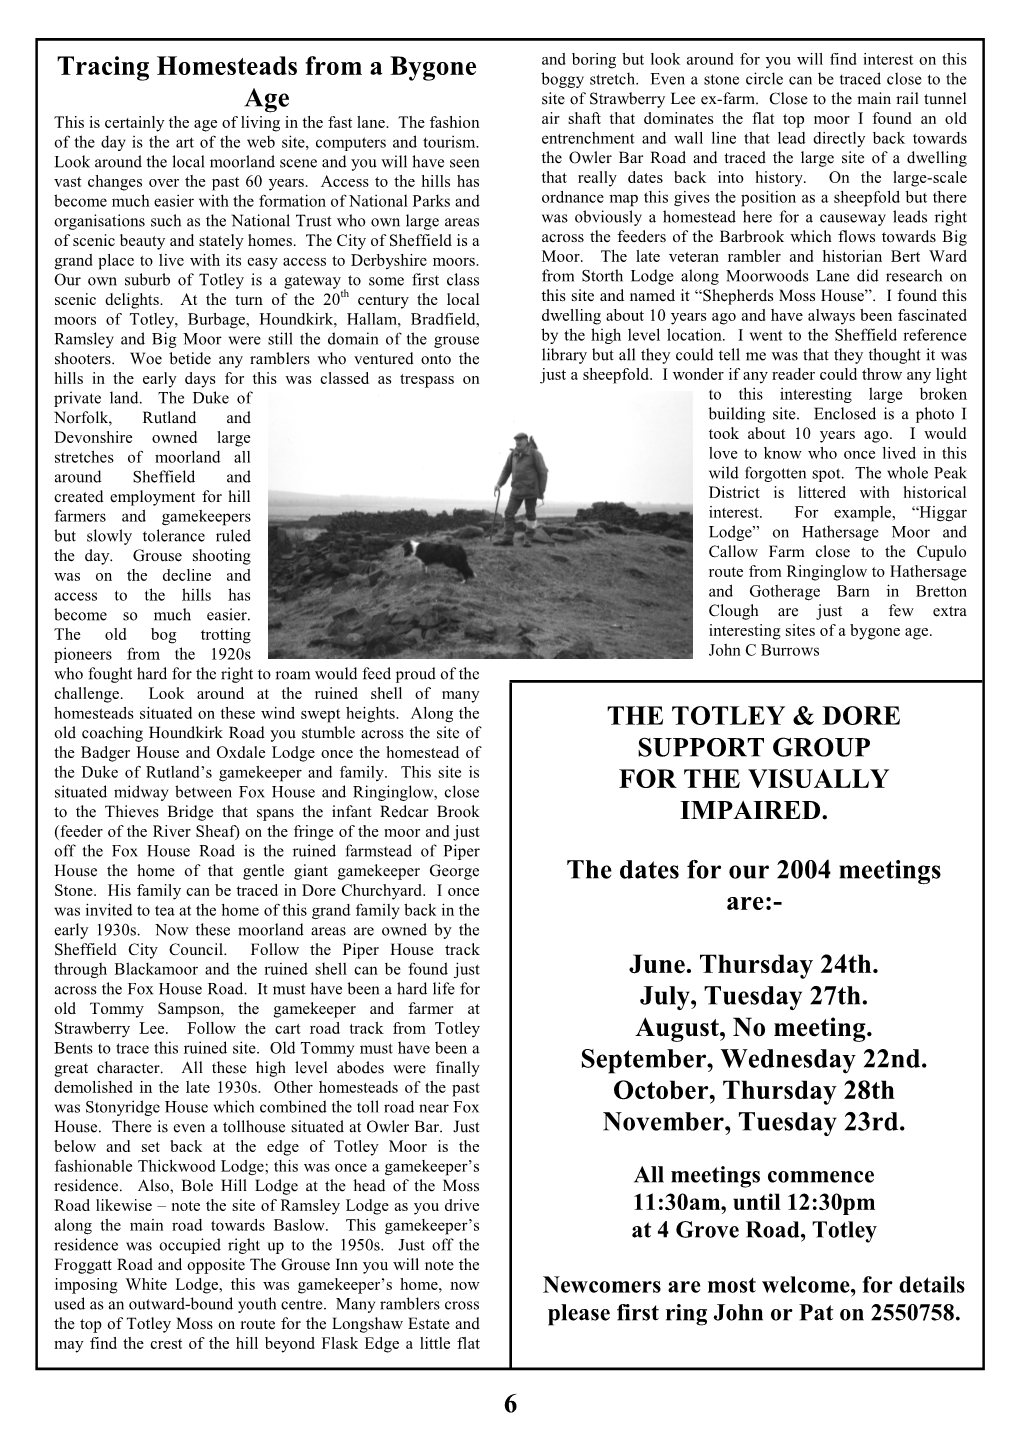 6 Tracing Homesteads from a Bygone Age the TOTLEY & DORE SUPPORT GROUP for the VISUALLY IMPAIRED. the Dates for Our 2004